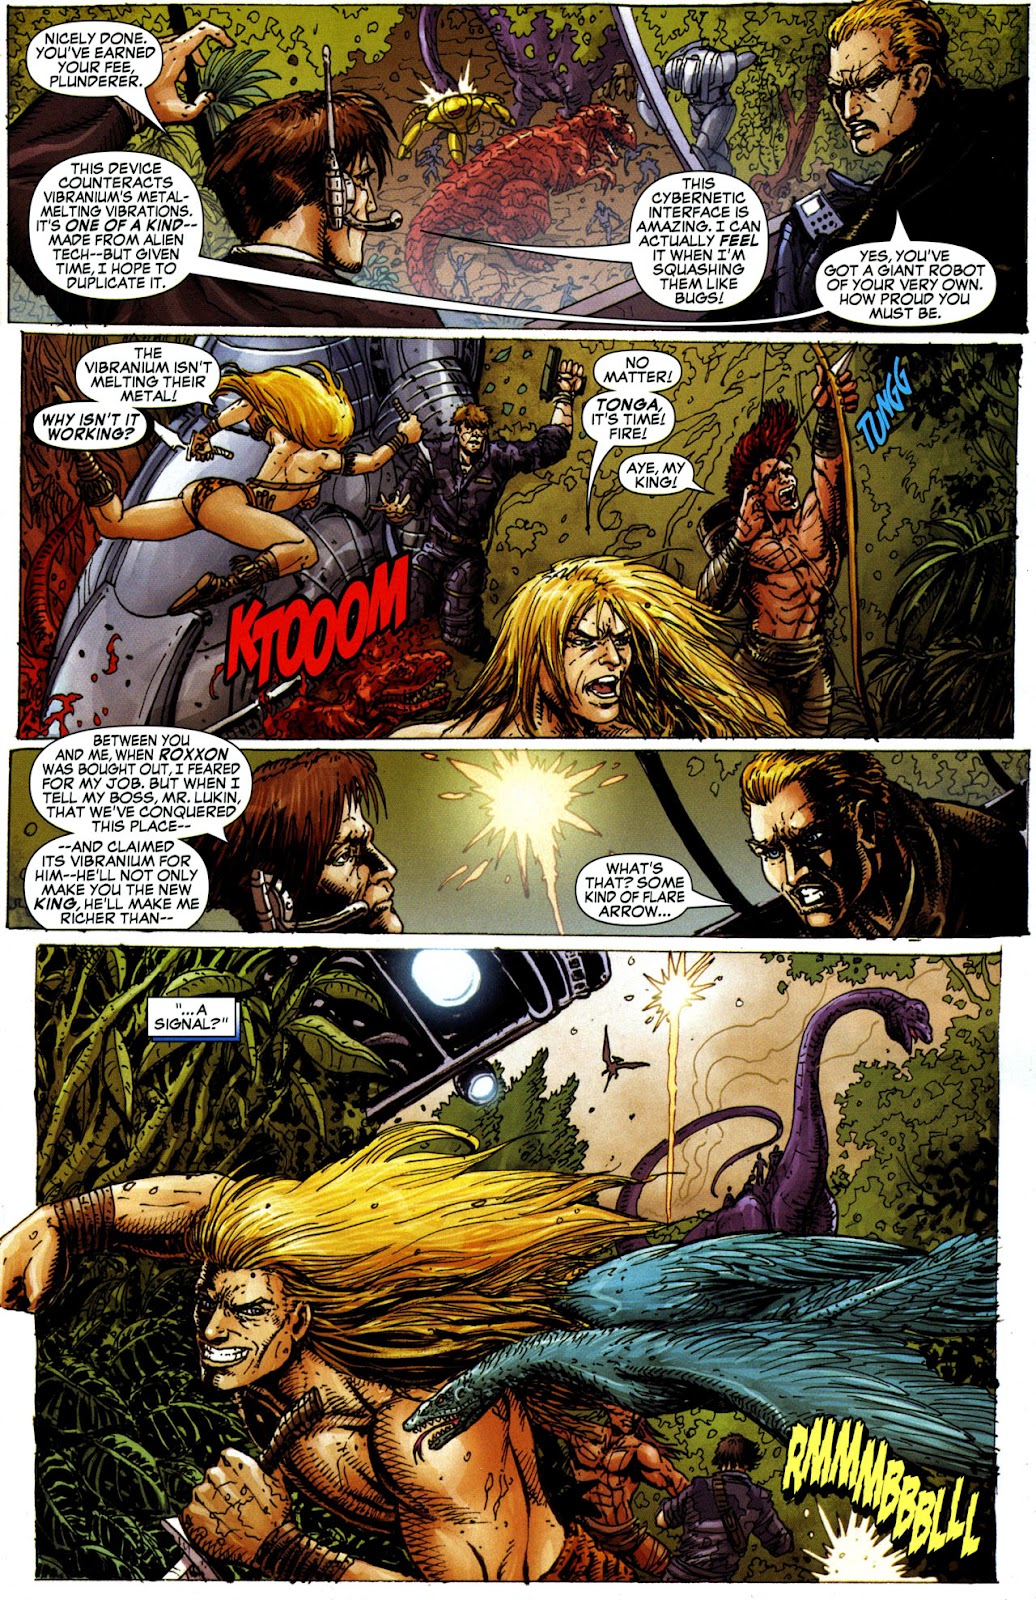 Marvel Comics Presents (2007) issue 6 - Page 15